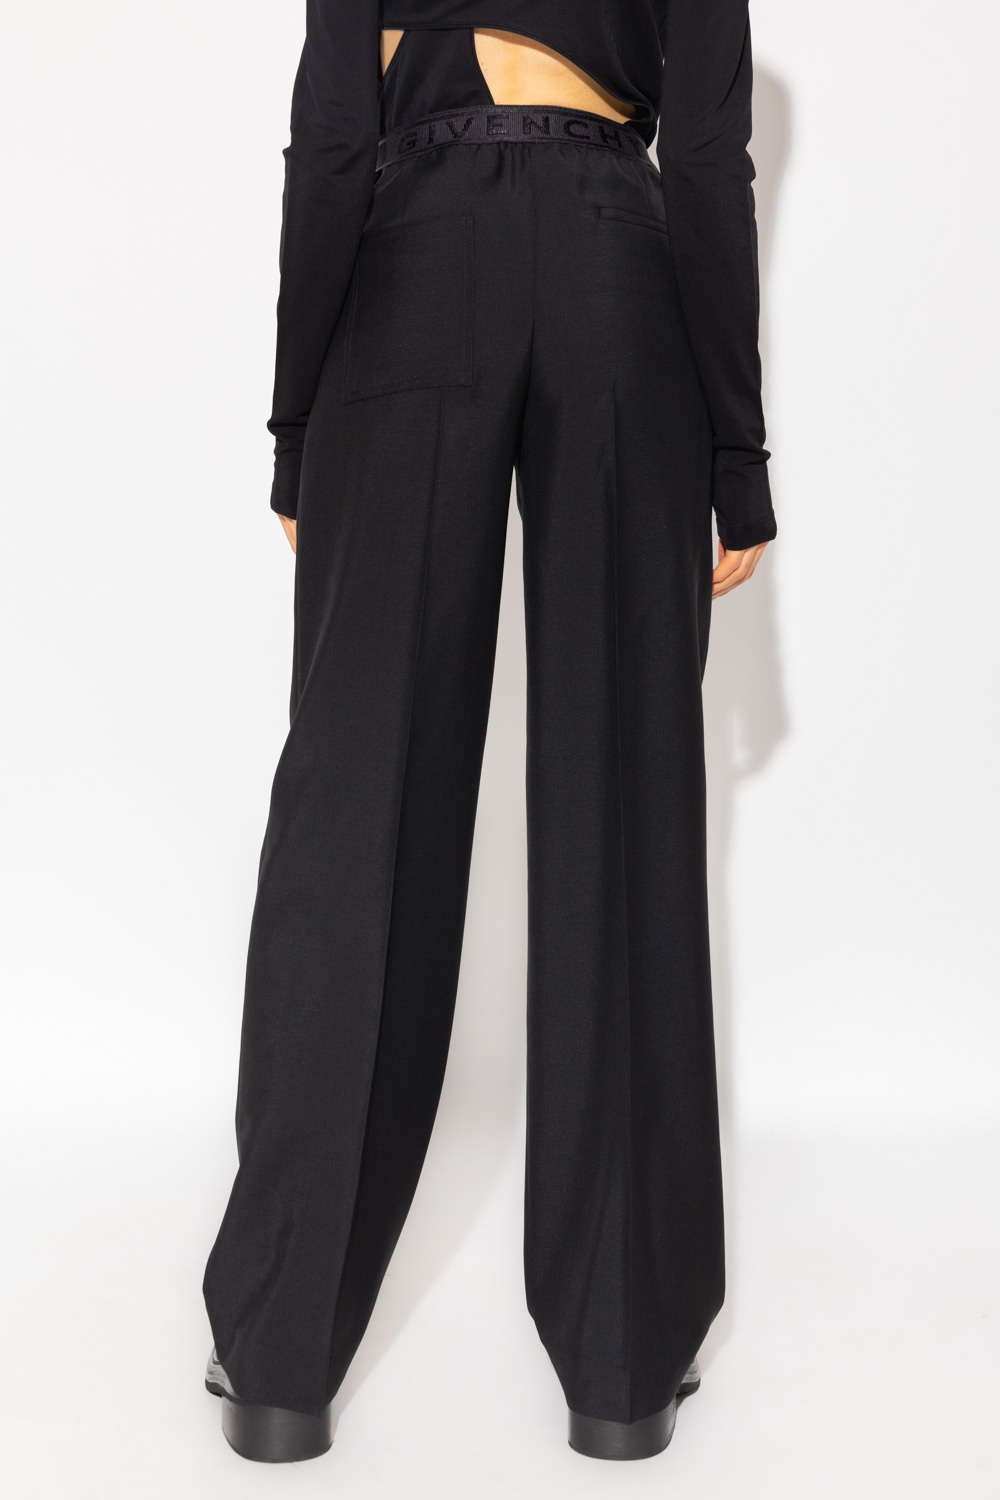 Givenchy Wool pleat-front Flat trousers